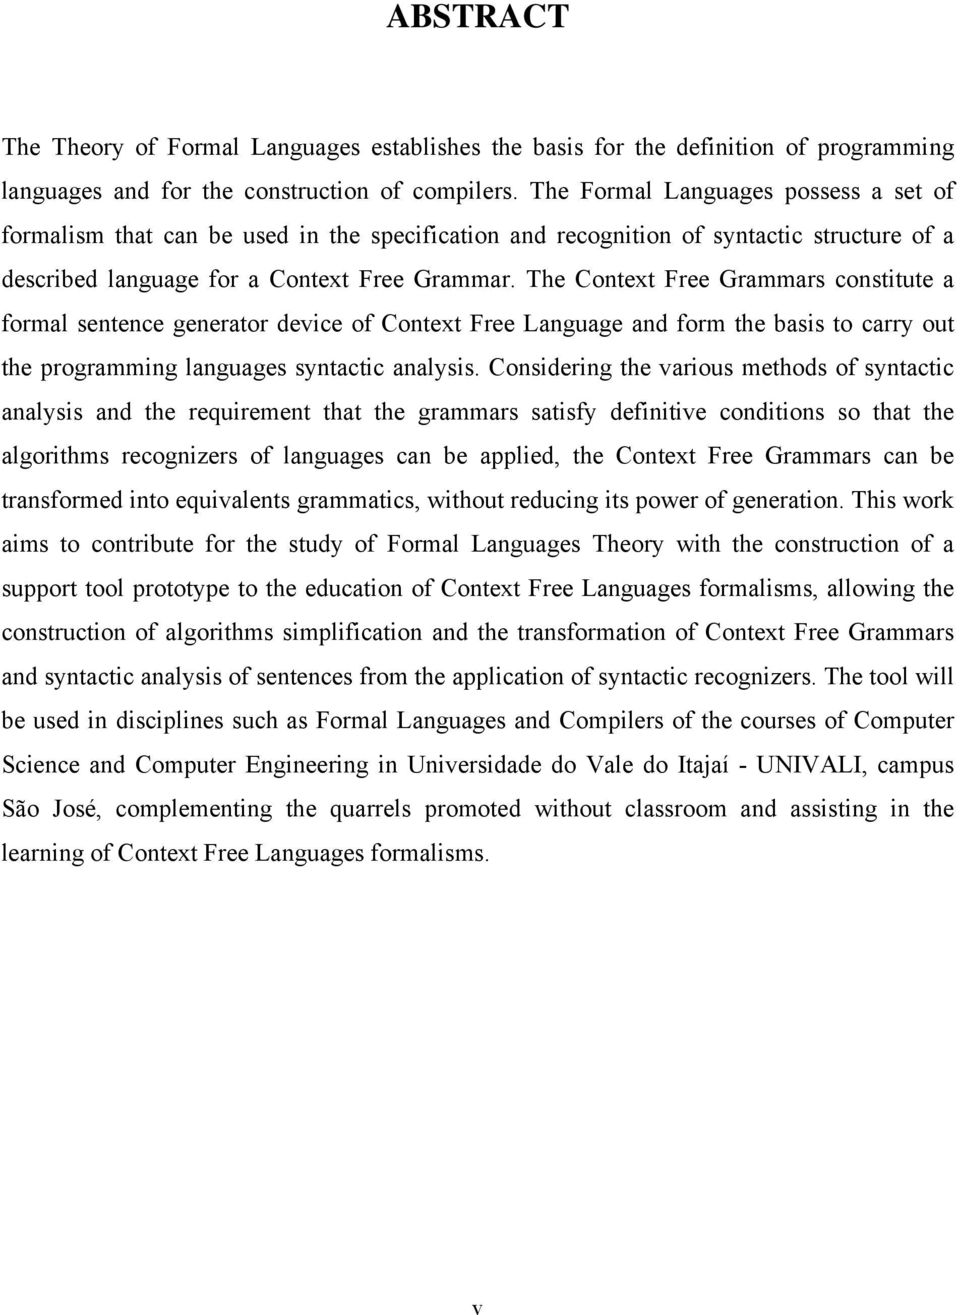 The Context Free Grammars constitute a formal sentence generator device of Context Free Language and form the basis to carry out the programming languages syntactic analysis.